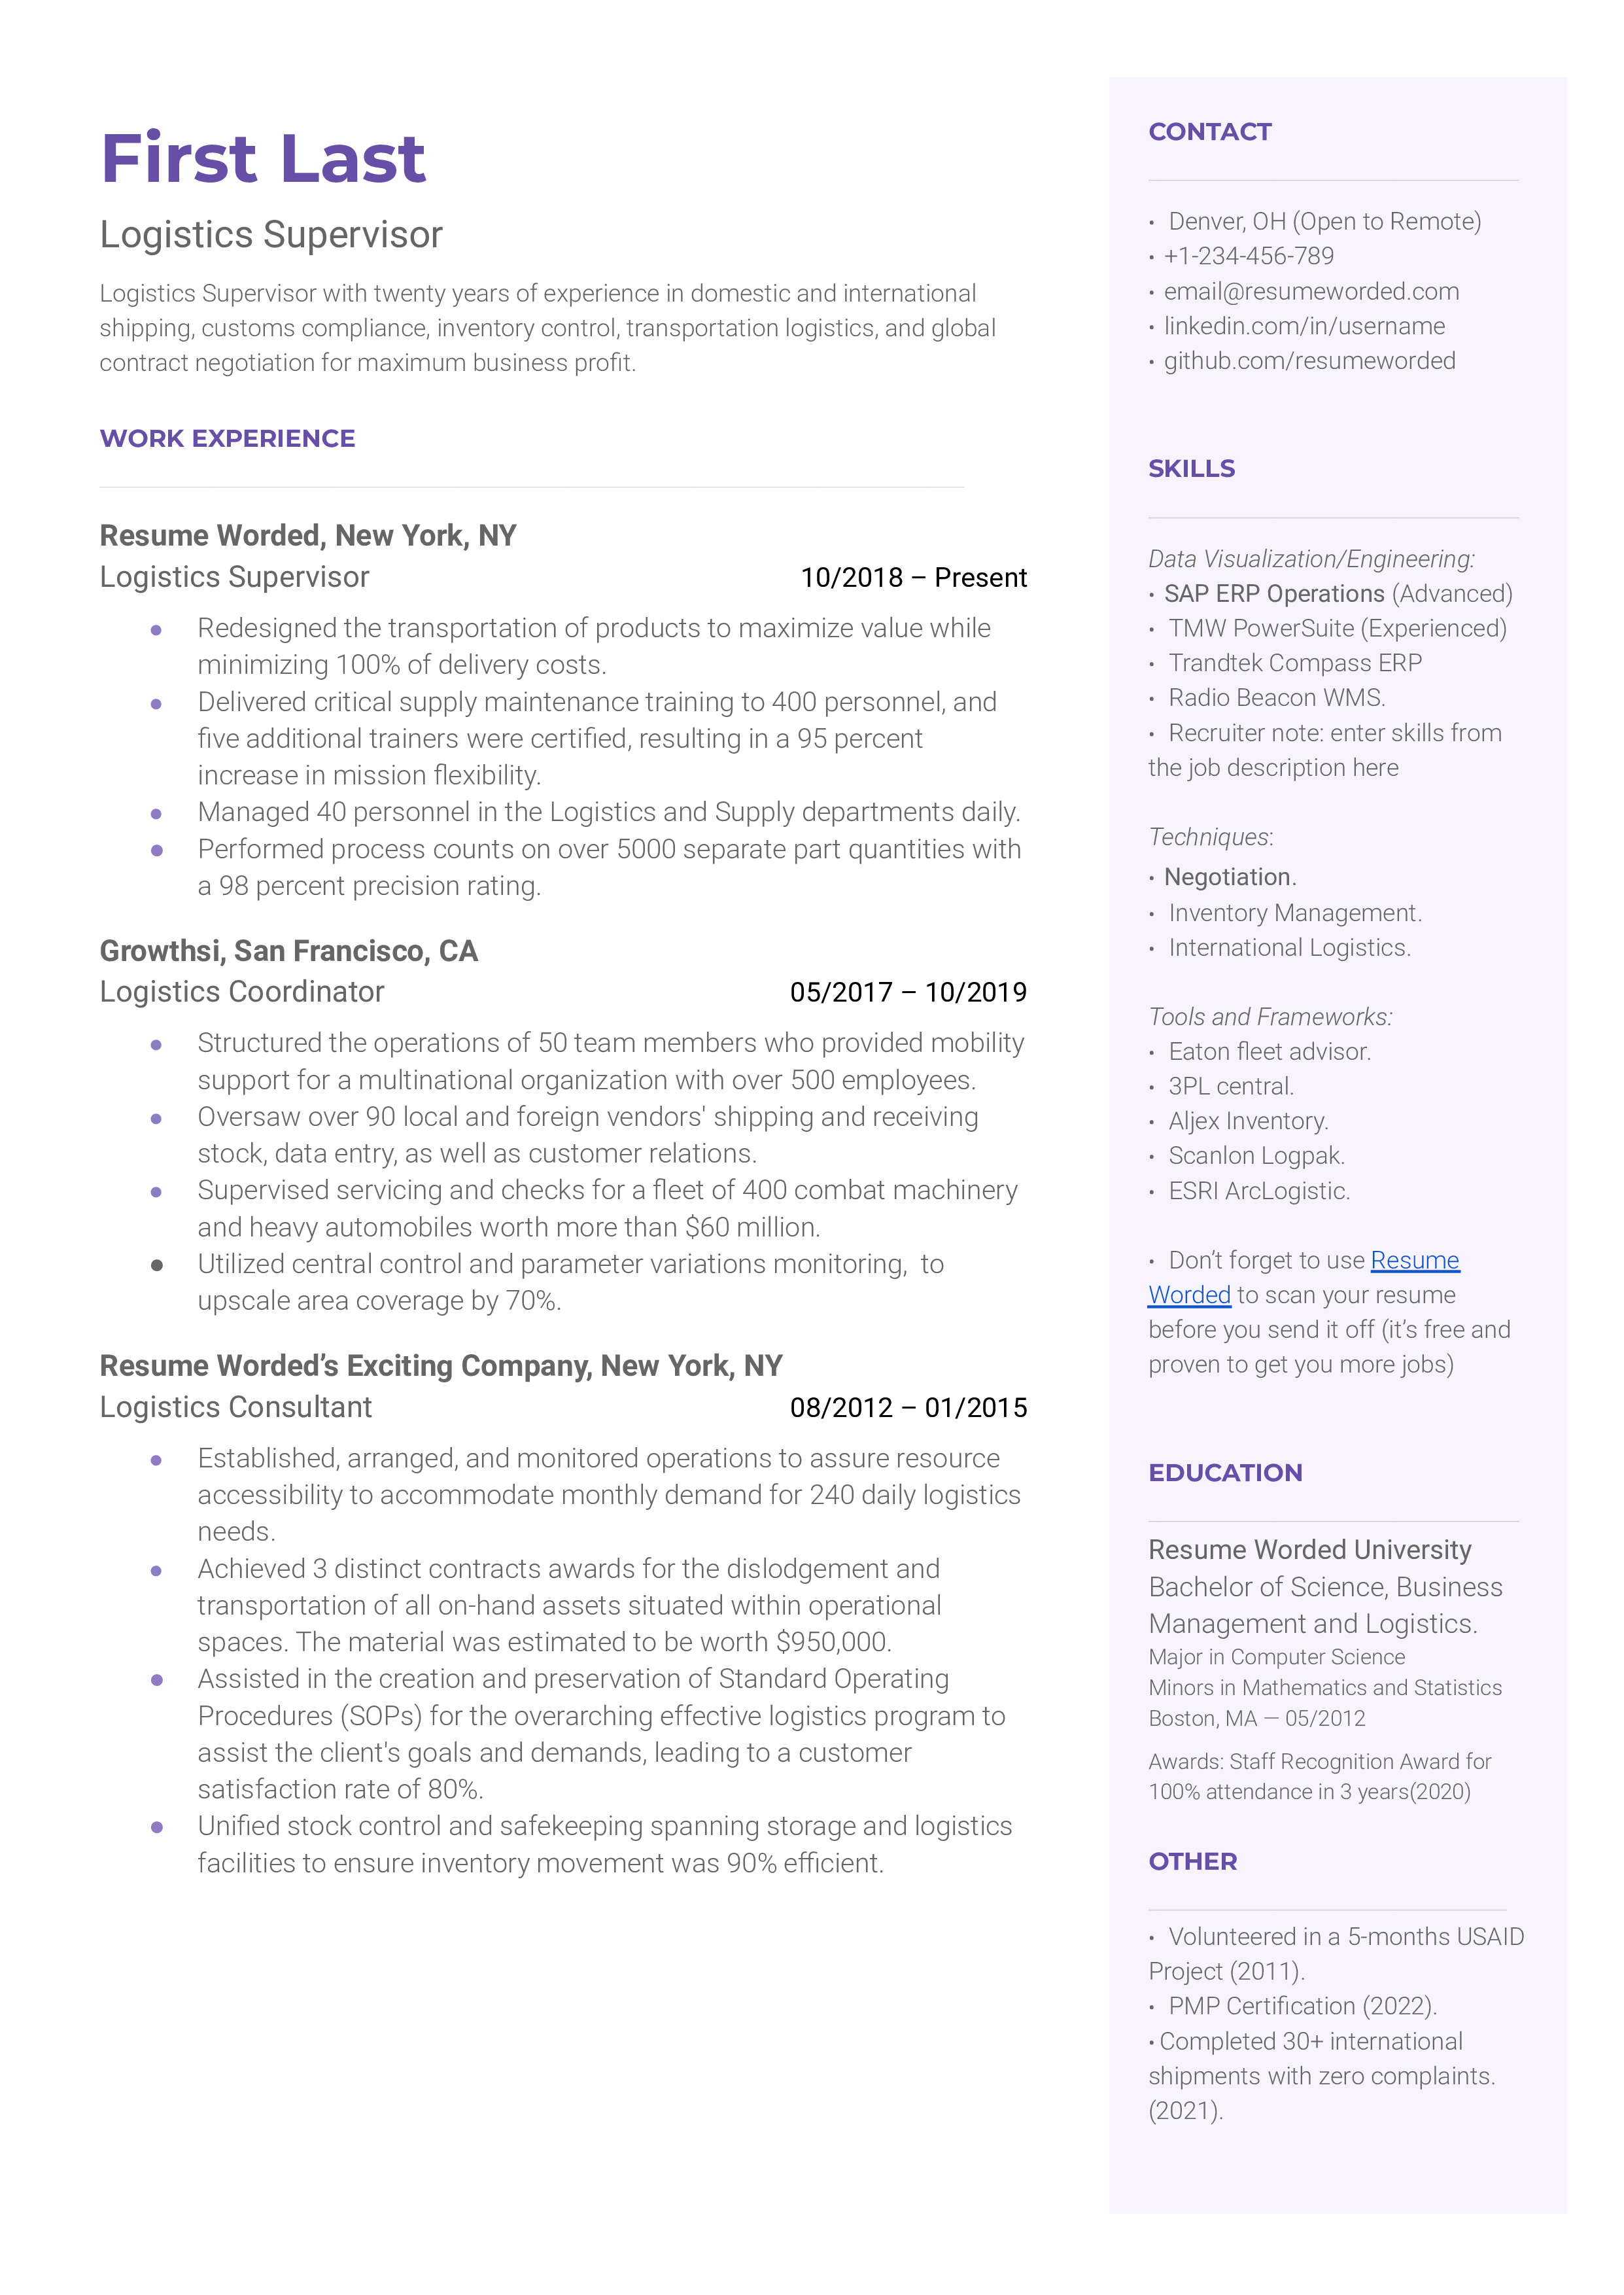 A resume for a logistics supervisor with a BS in business management and logistics, an experience as a logistics coordinator.